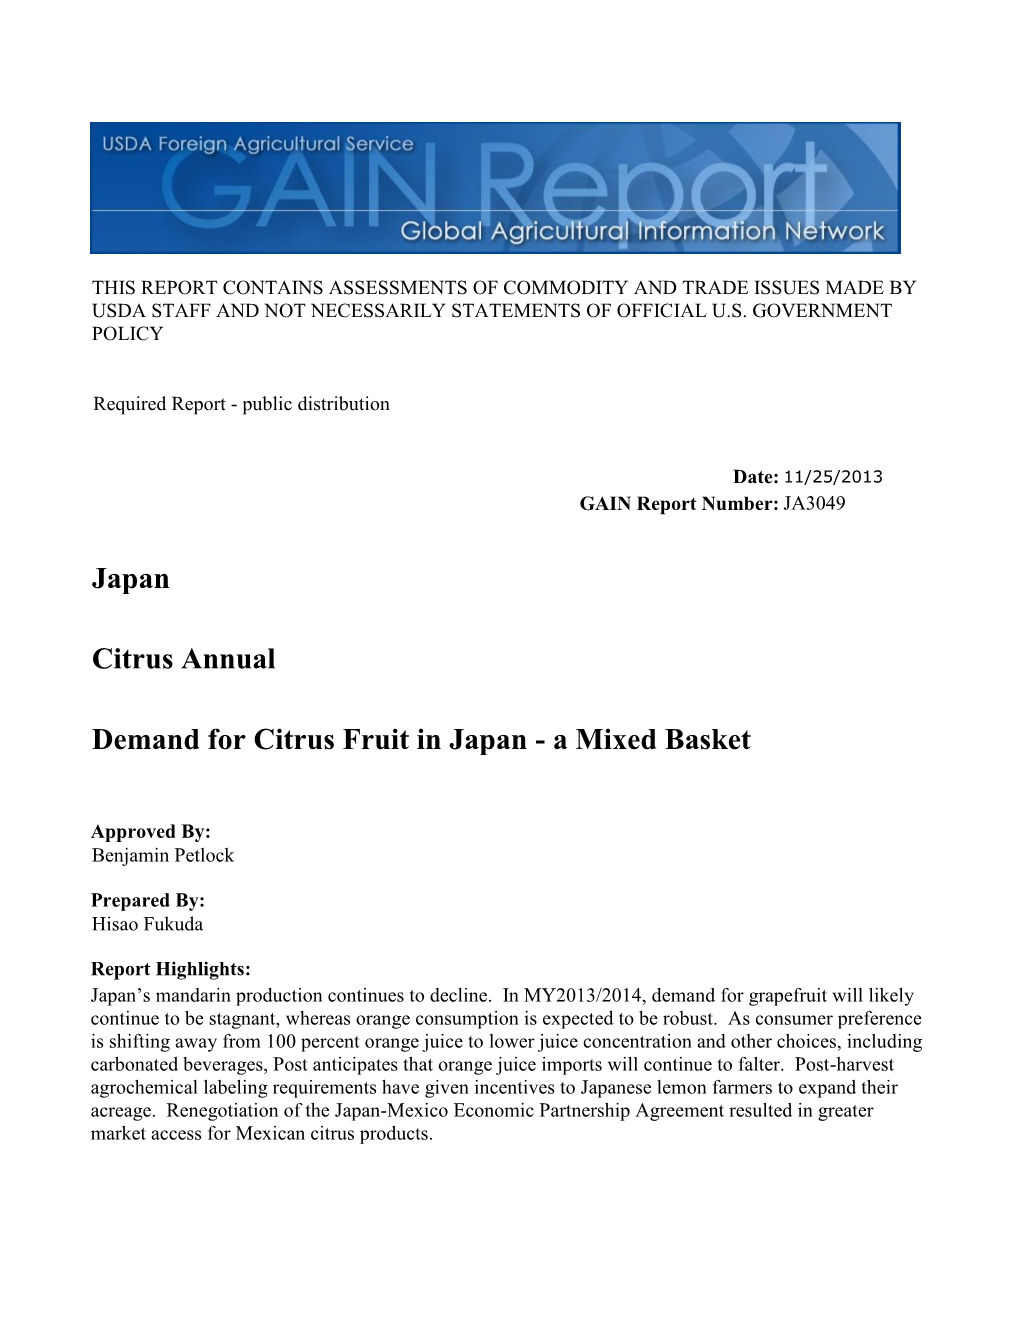 Demand for Citrus Fruit in Japan - a Mixed Basket